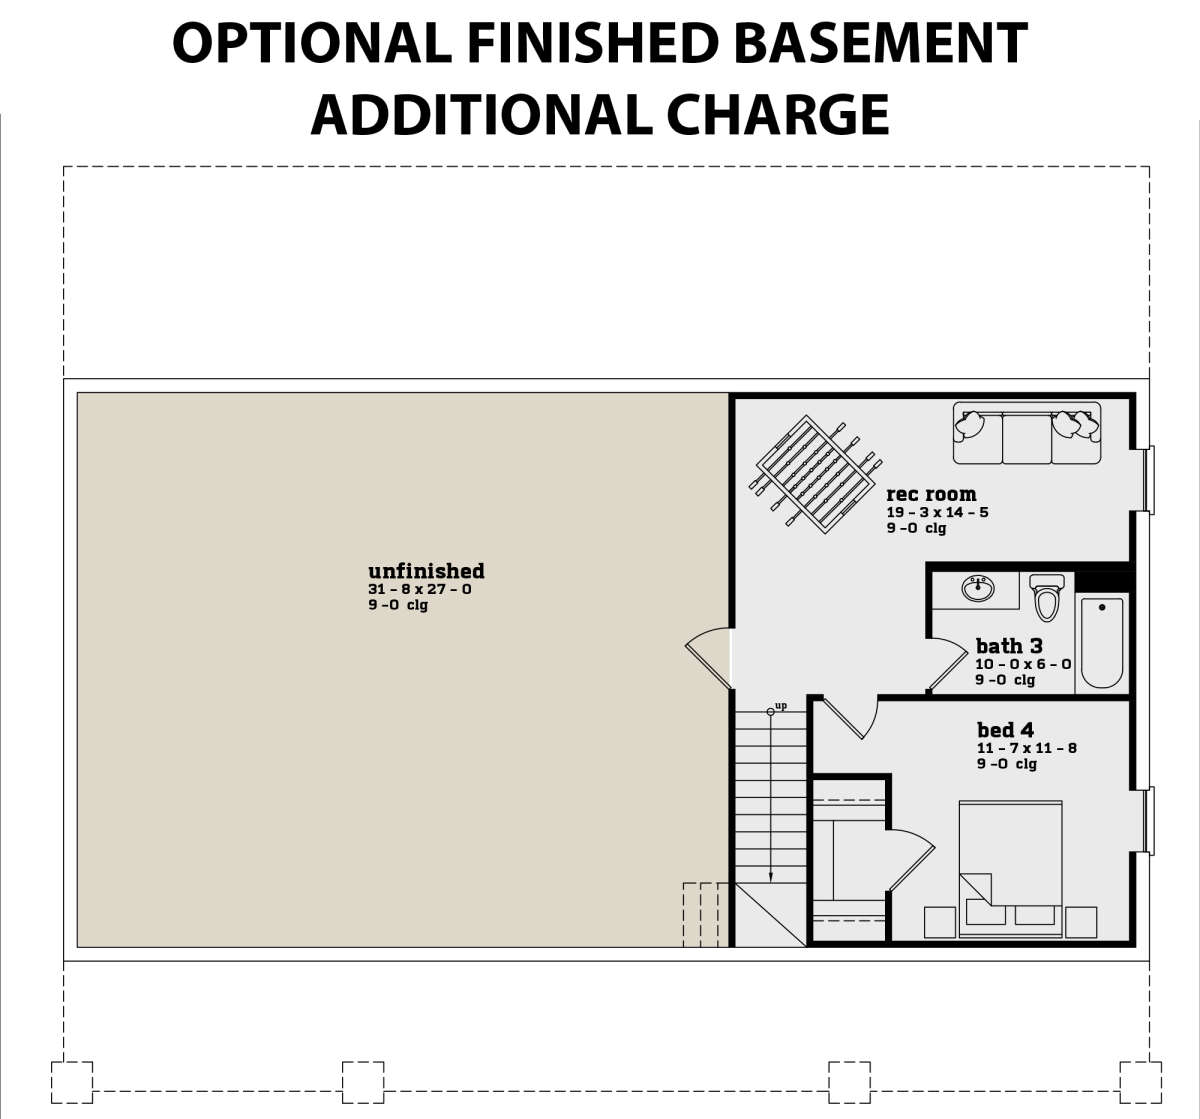 Finished Basement Option for House Plan #7174-00001